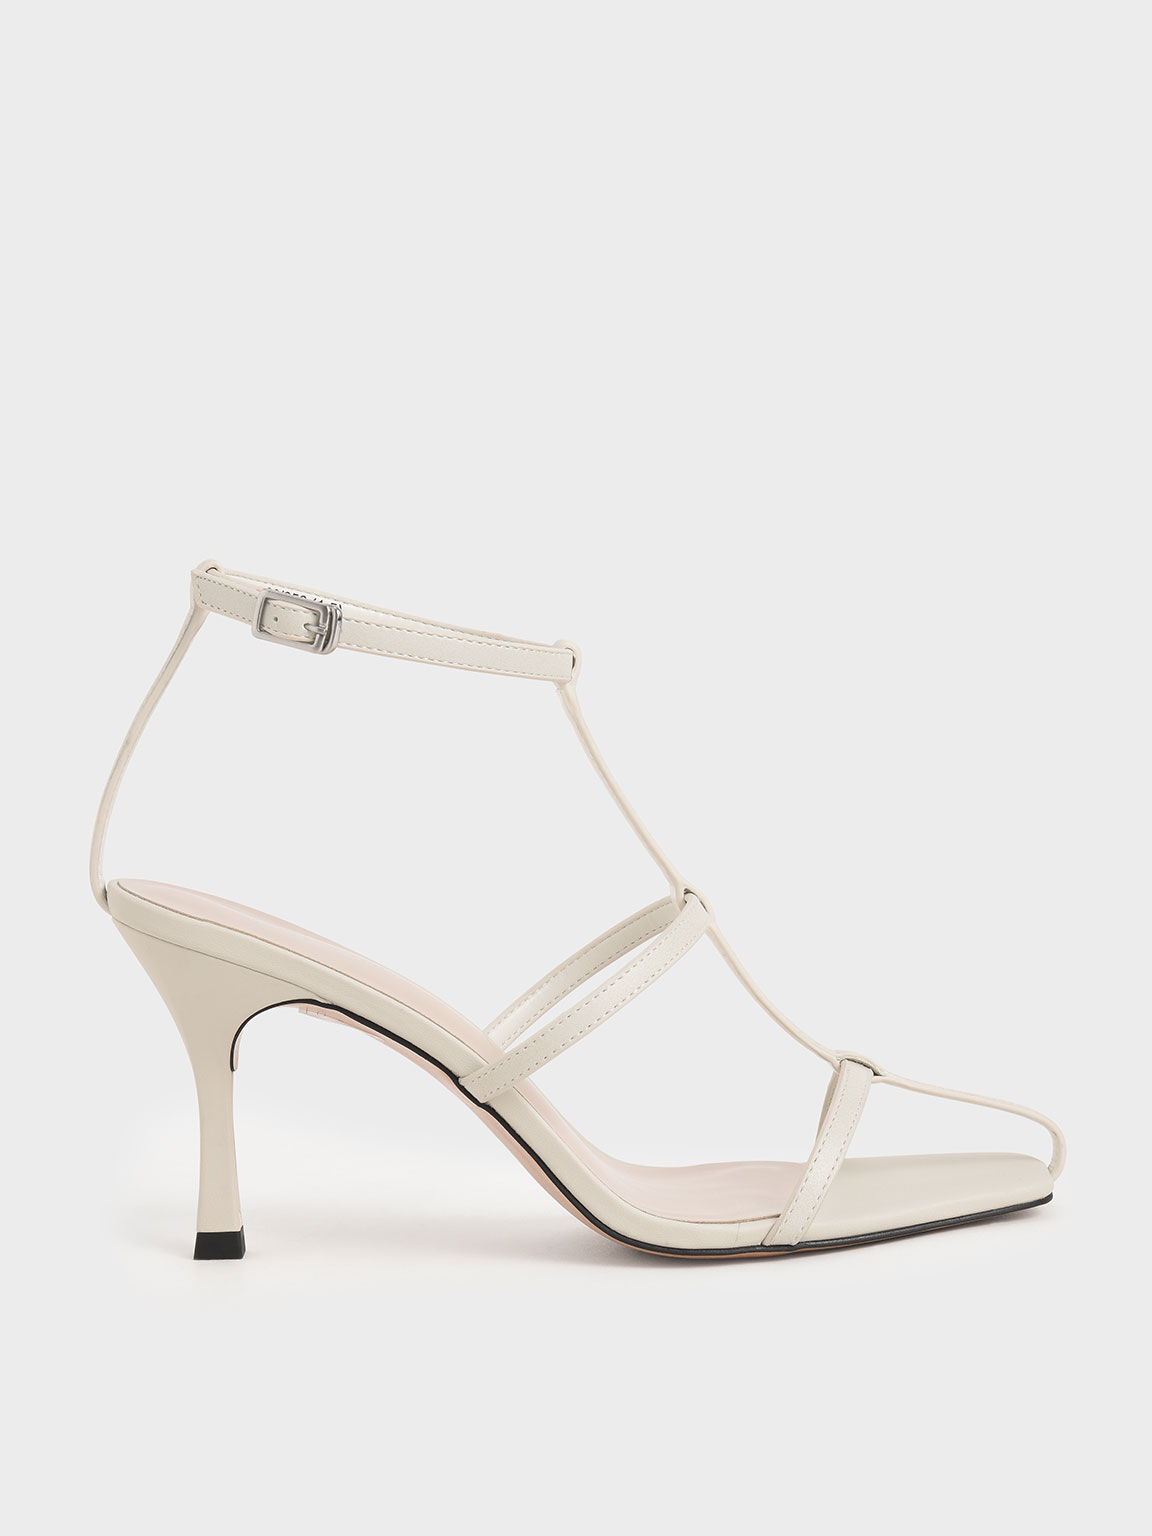 Caged Strappy Heeled Sandals, White, hi-res